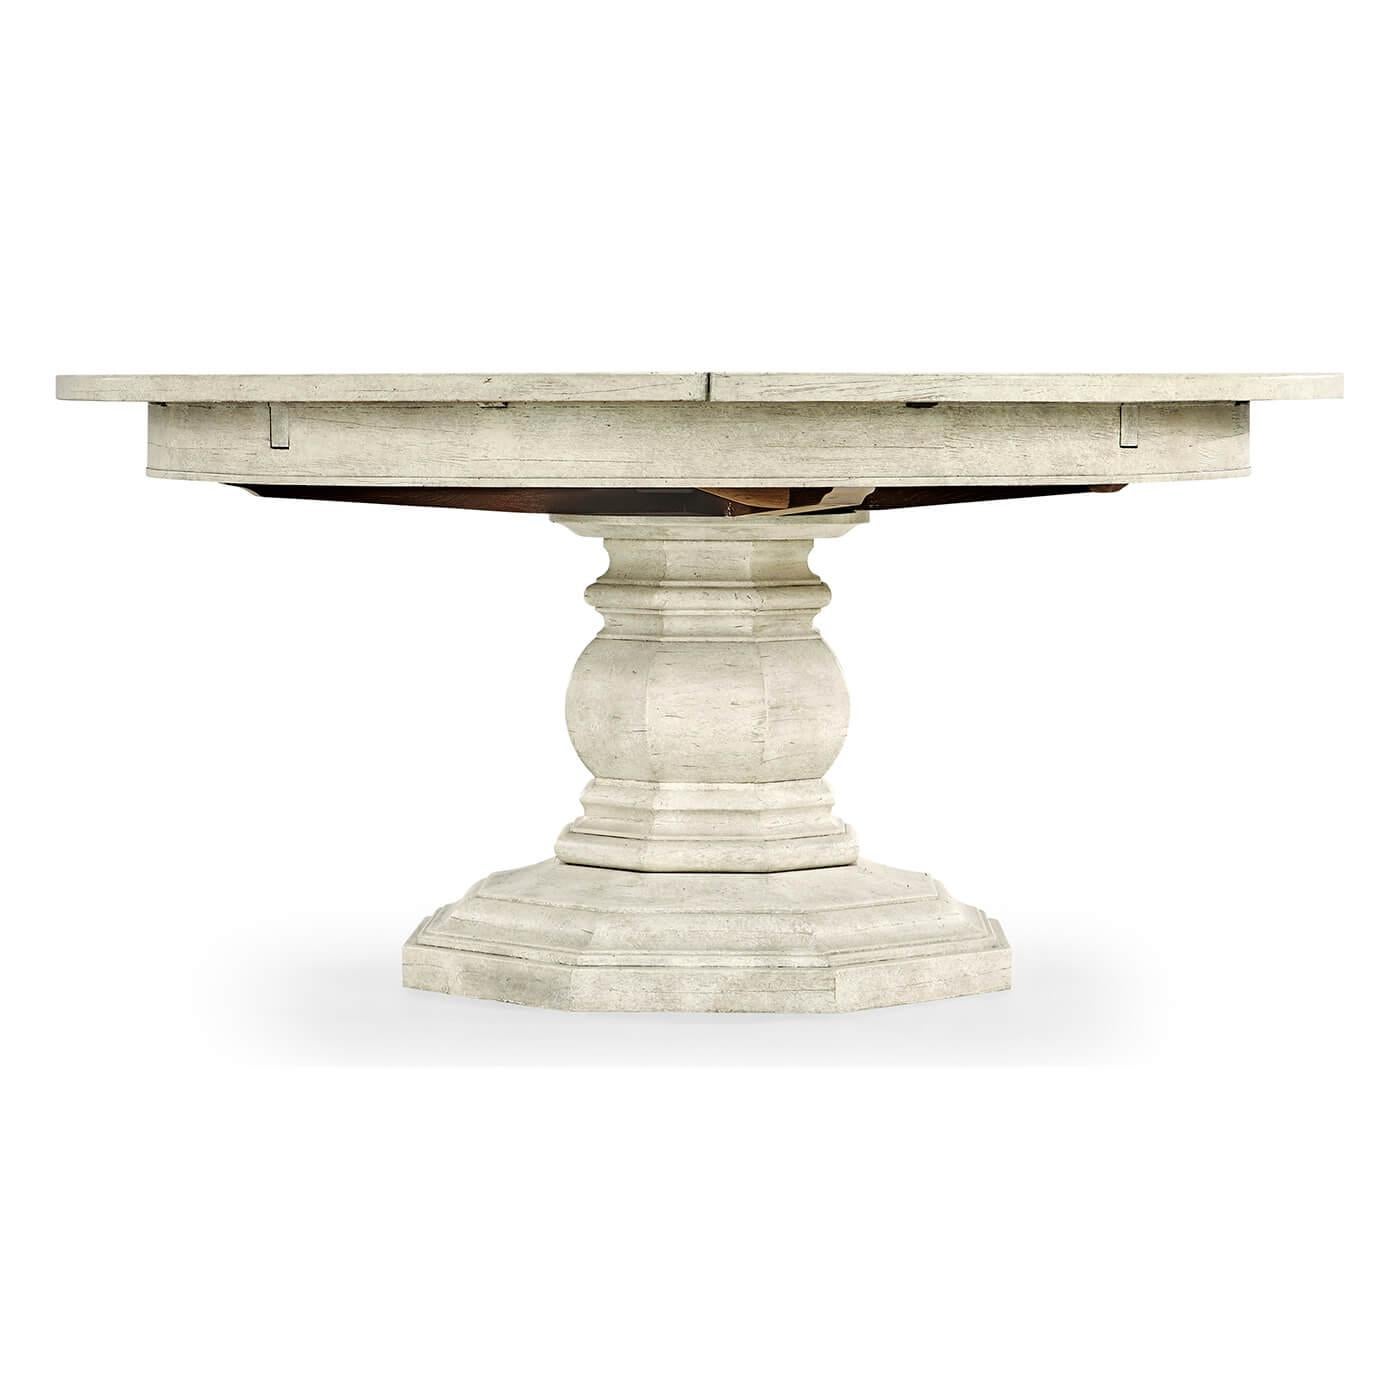 A French Provincial style whitewash driftwood topped round dining table with a rustic finish showing exposed saw marks set on a substantial baluster stem base, the table extending via an ingenious mechanism of self-storing hinged fold-out leaves